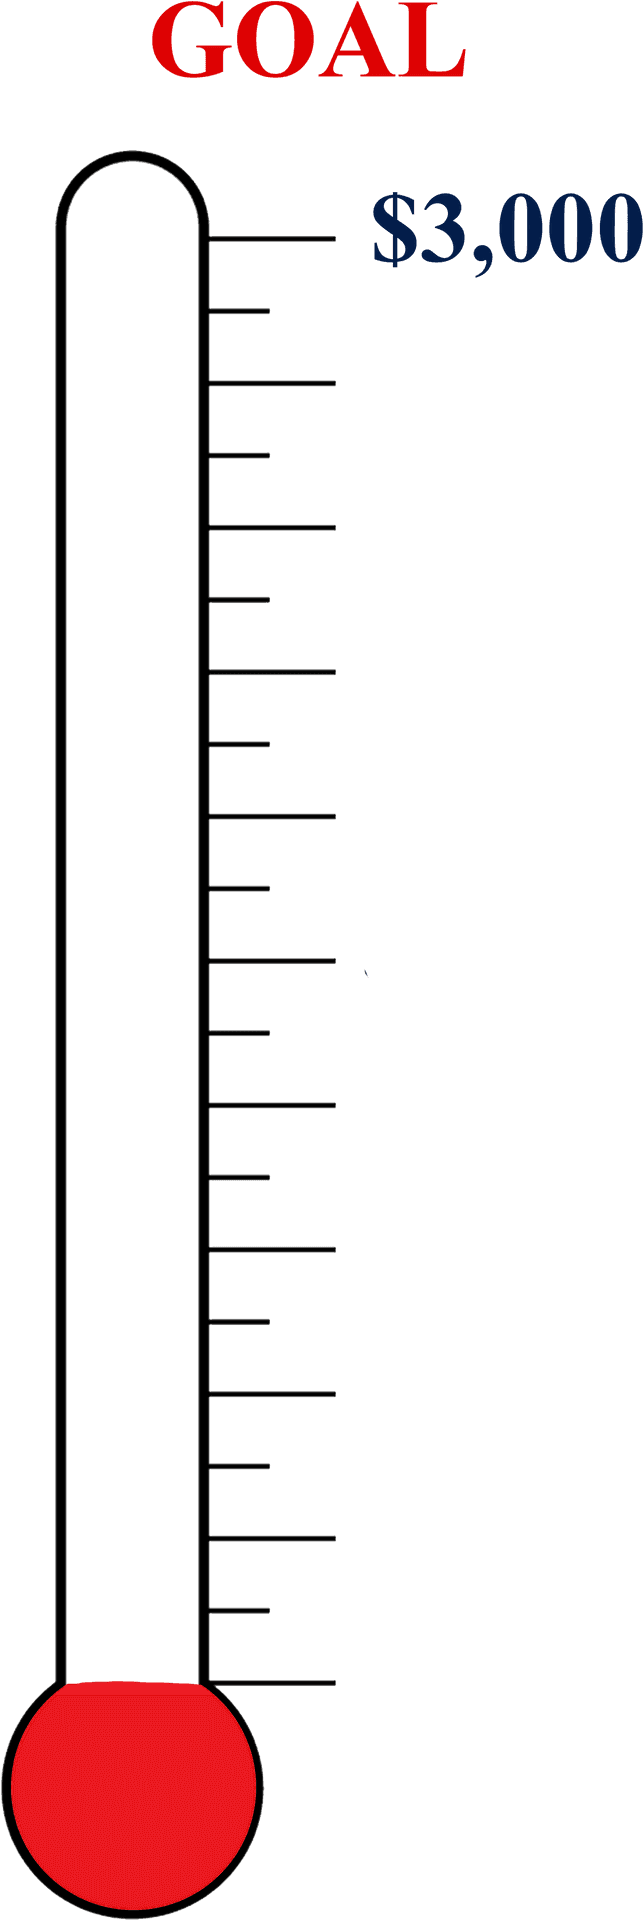 Fundraising Thermometer Goal3000 PNG